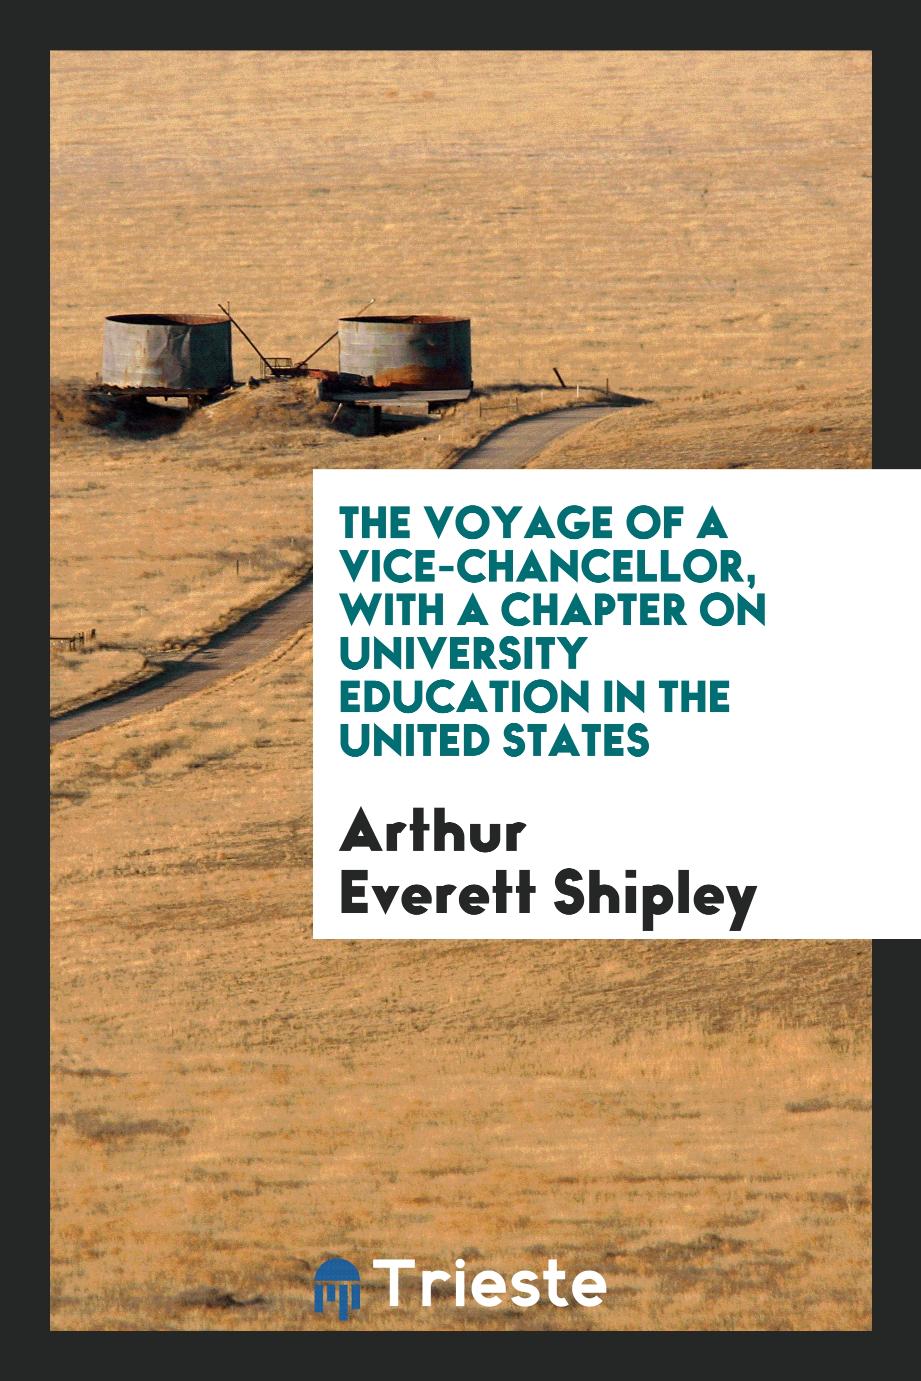 The voyage of a vice-chancellor, with a chapter on university education in the United States